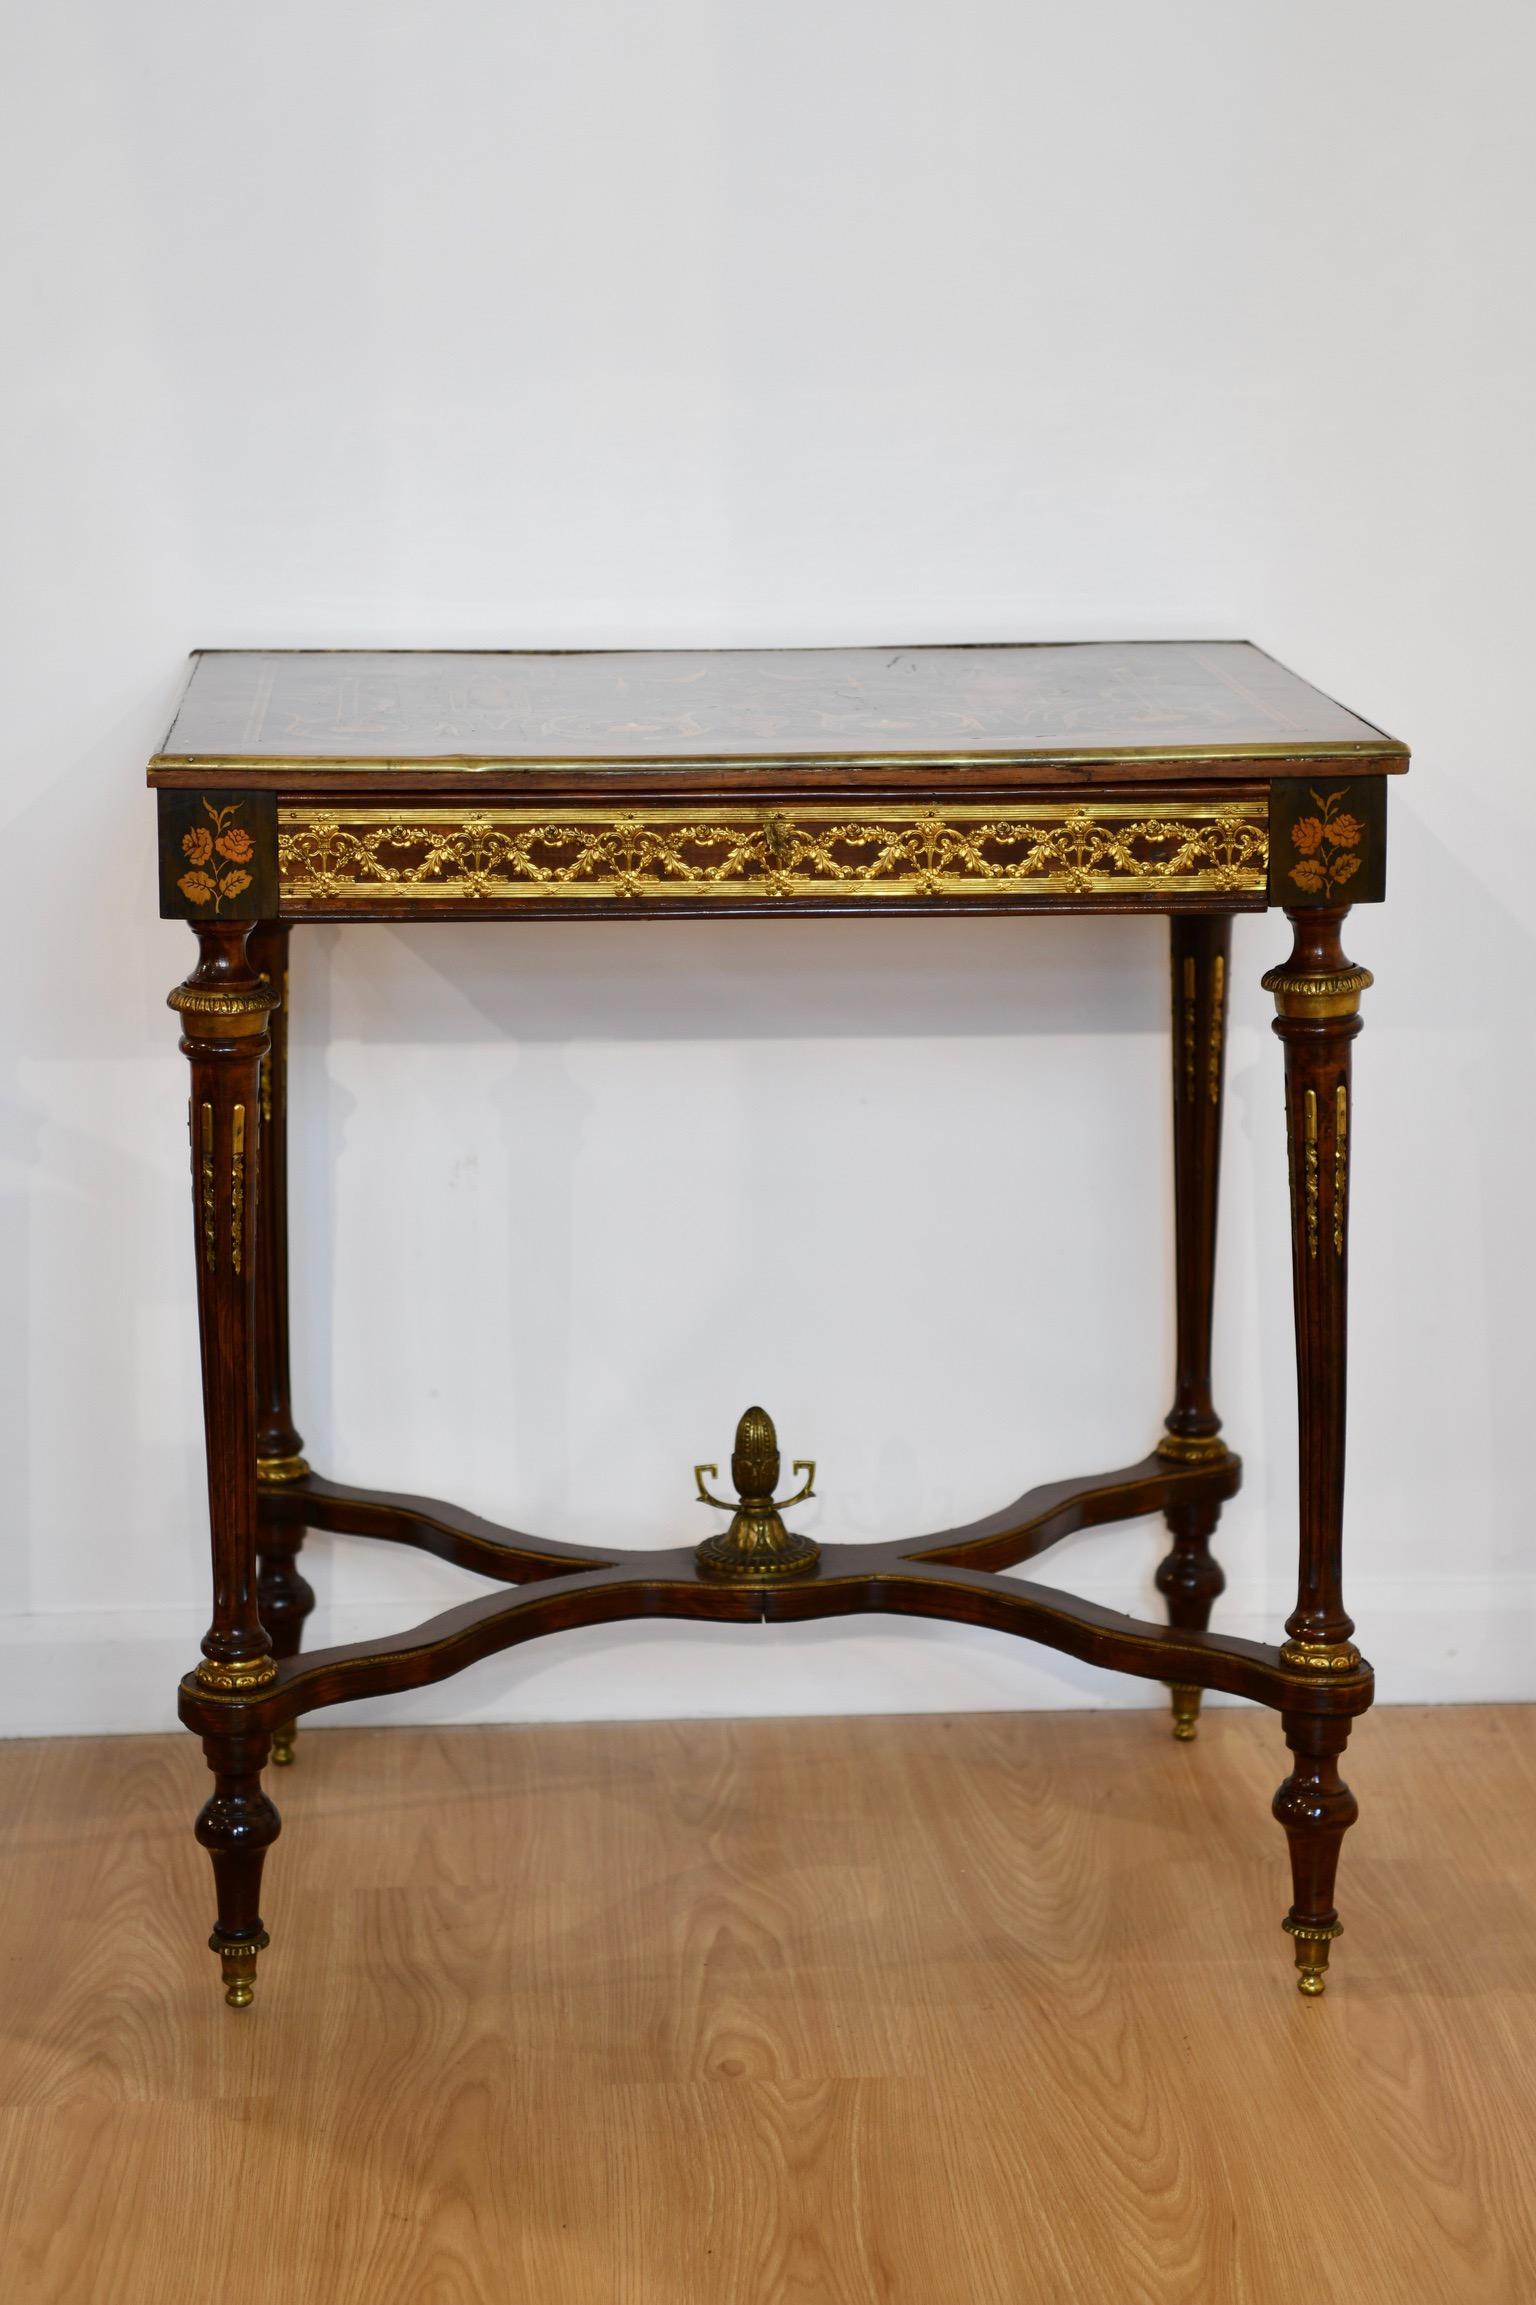 Louis XVI-style marquetry inlaid writing table with Neoclassical motif and mother of pearl inlay over gilt bronze mounted apron with single drawer. Table raised on tapered reeded legs with acorn finial mounted stretcher. Dimensions: 29